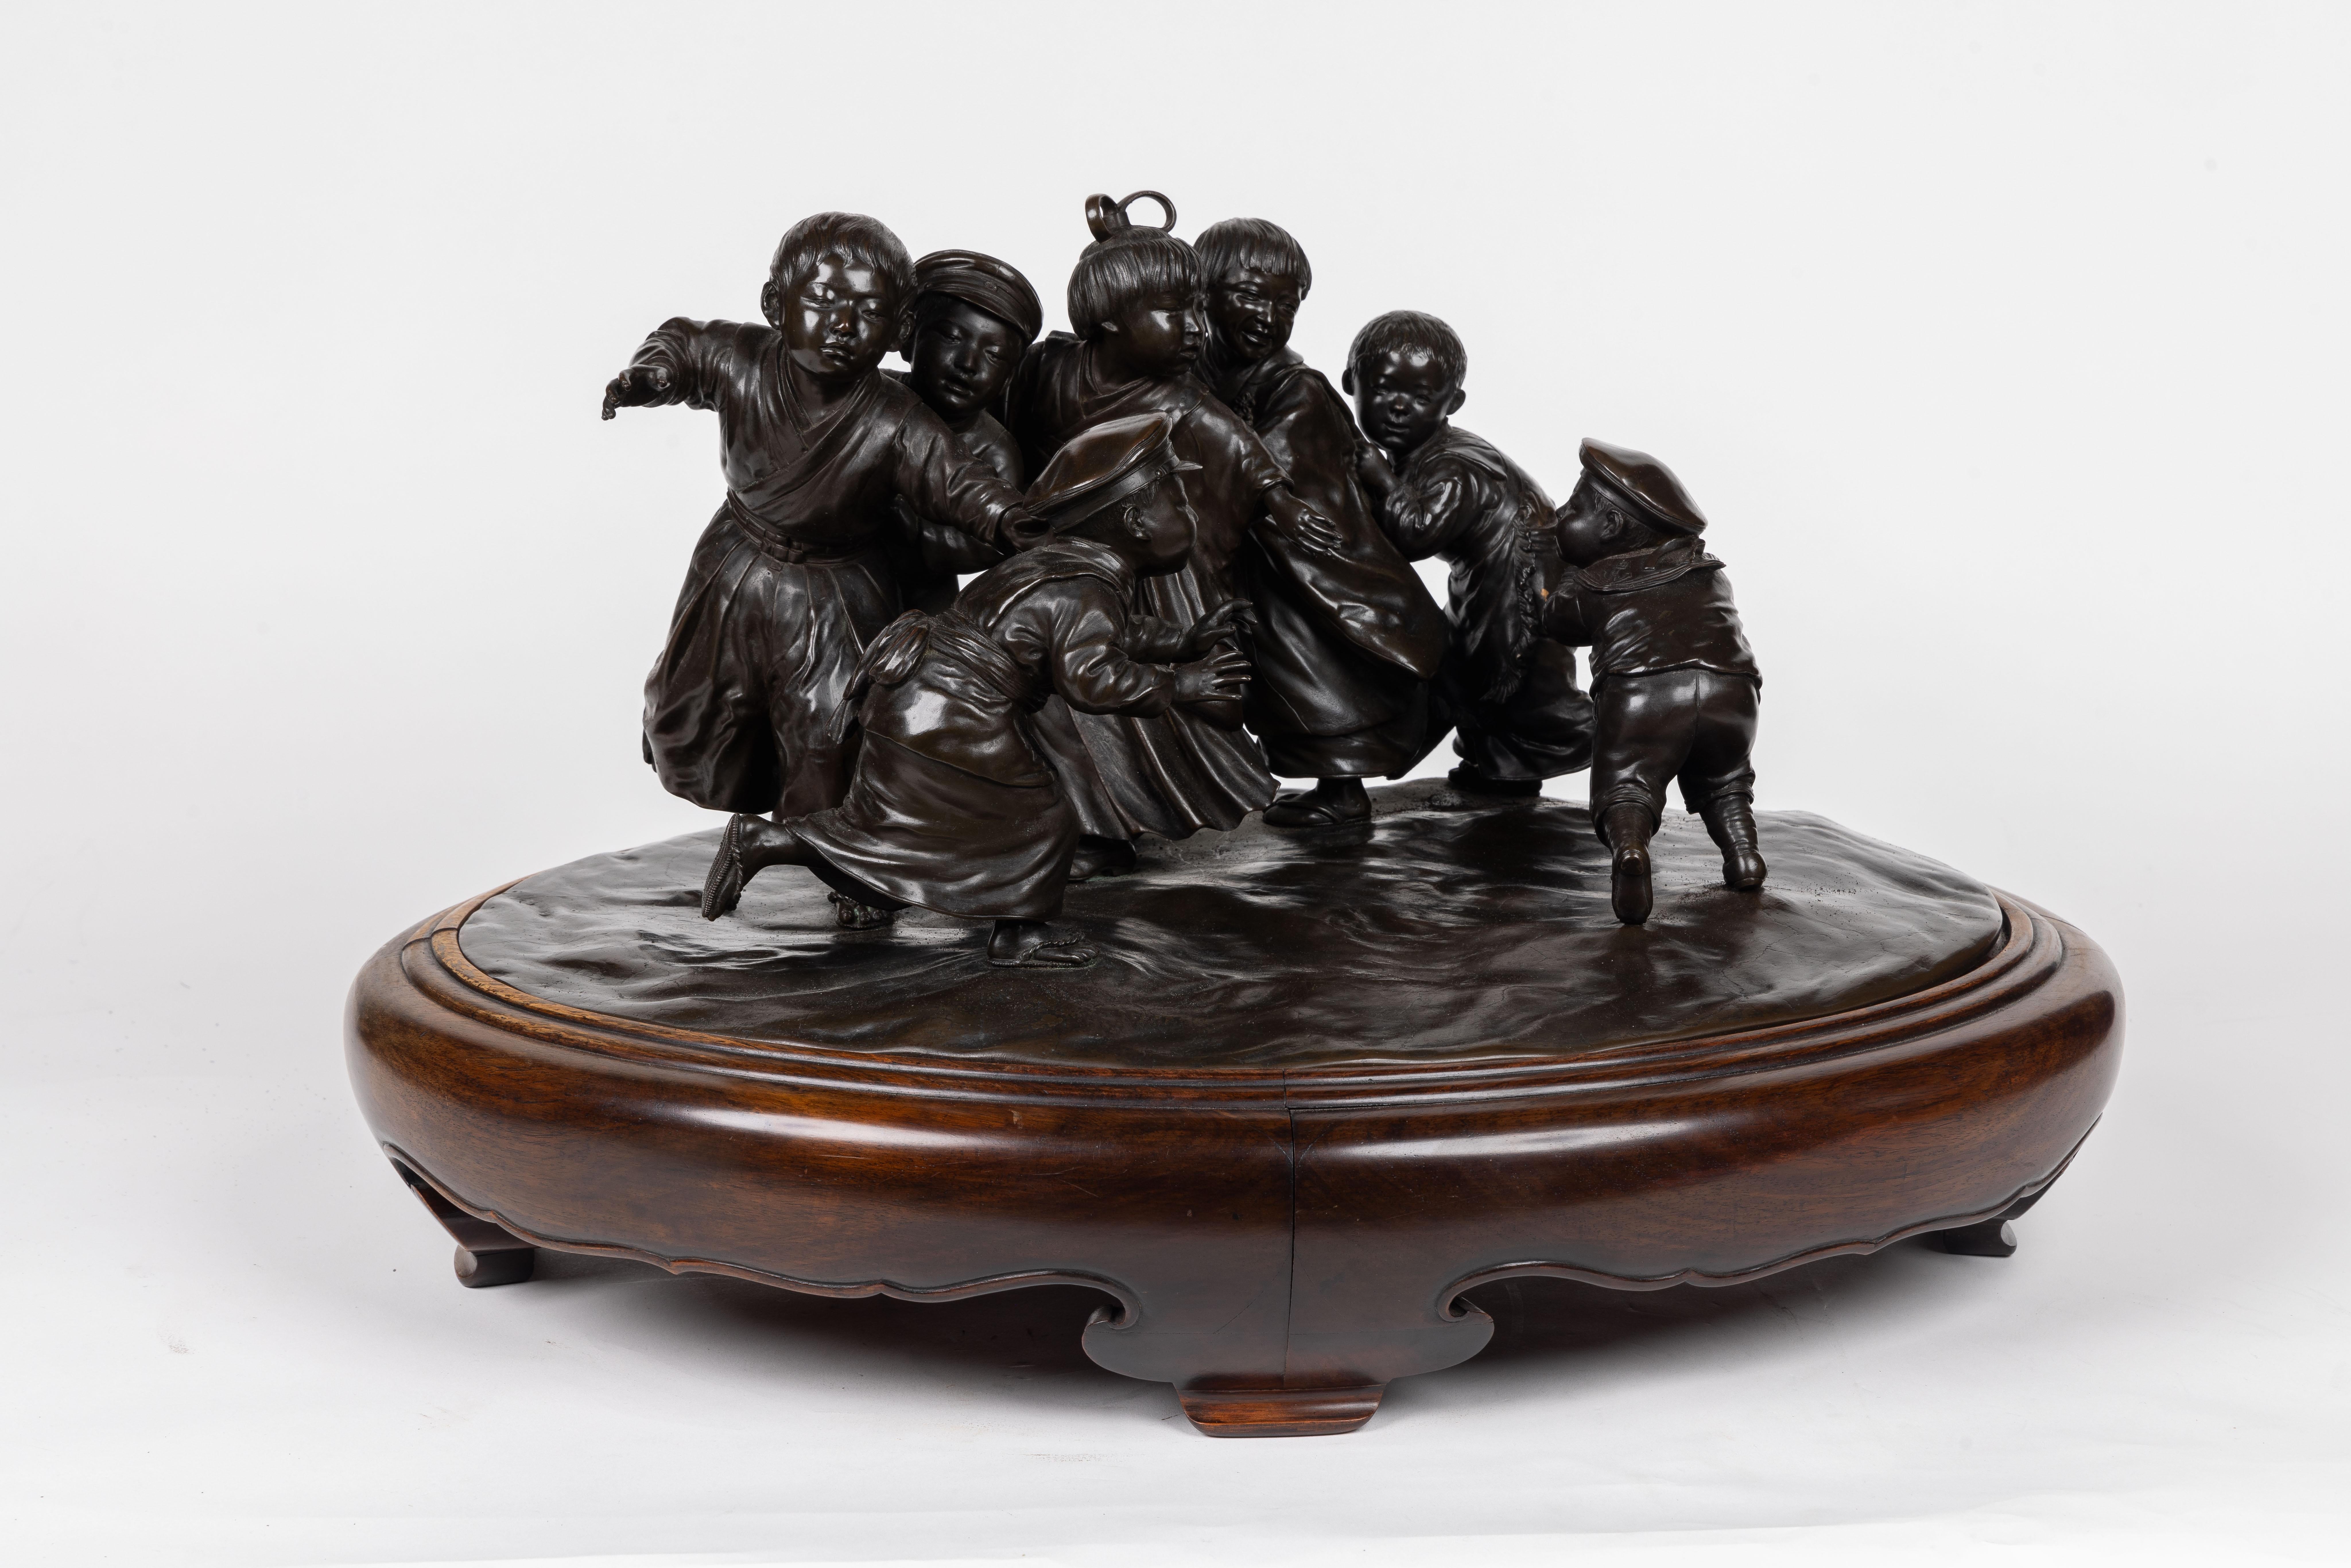 Presenting an extraordinary Large and Exceptional Japanese Meiji Period Tokyo School Bronze Sculpture depicting a delightful ensemble of six energetic boys engaged in a spirited pursuit of a single playful girl.
This magnificent sculpture